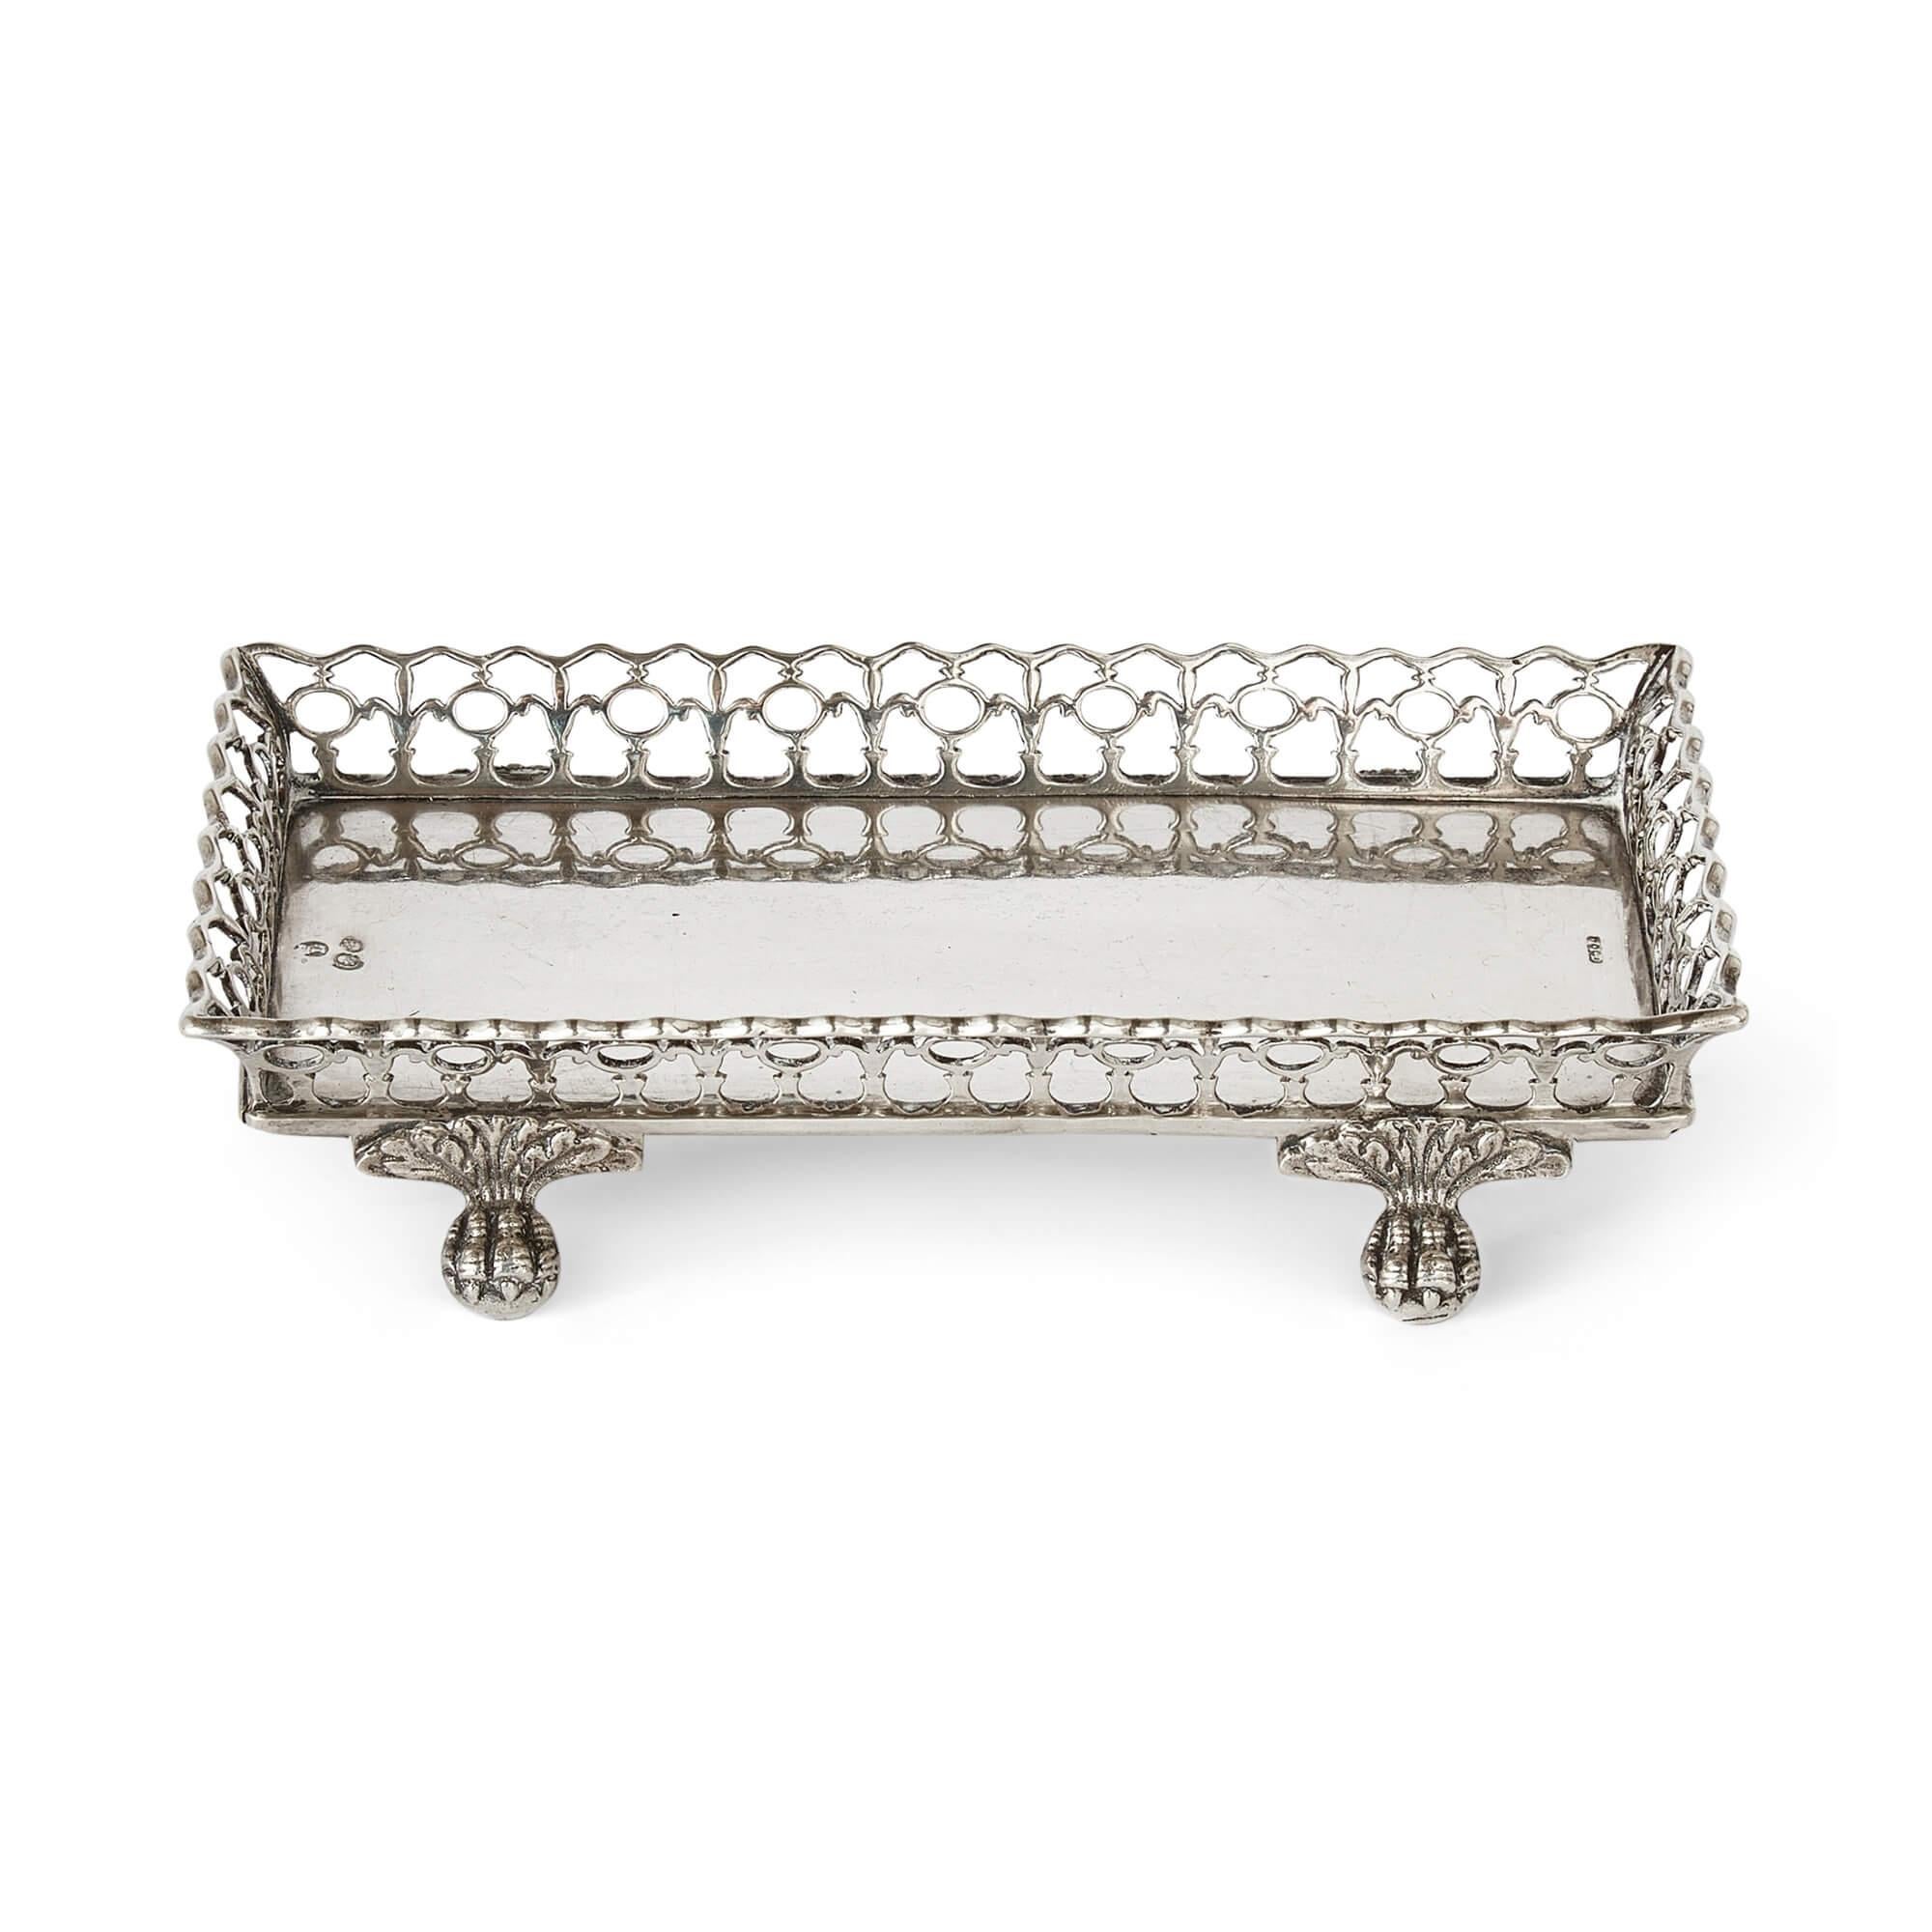 Portuguese silver set of four identical snuffer trays 
Portuguese, 19th Century
Height 3cm, width 16cm, depth 10cm 

A quartet of splendidly crafted Portuguese silver snuffer trays, hailing from 19th Century, constitutes this set. With their